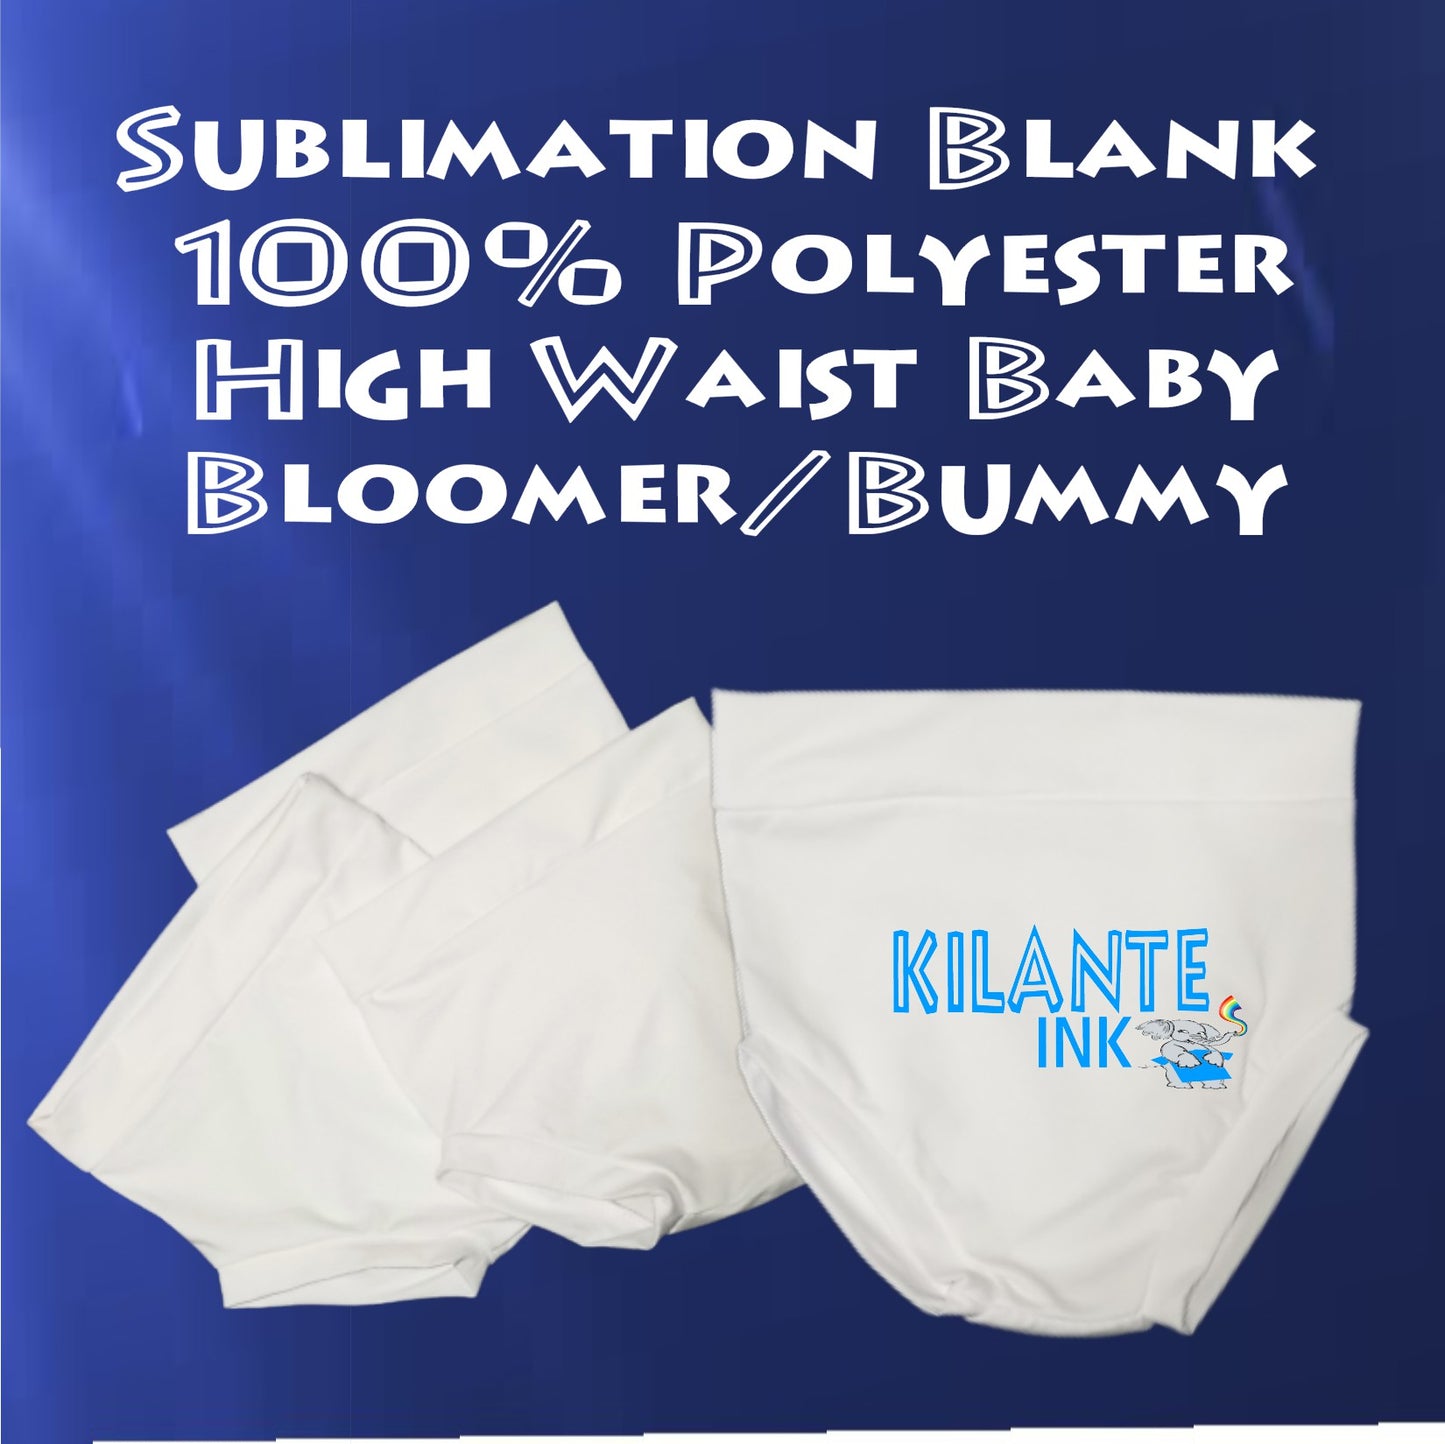 Sublimation Blank Baby Bloomer/Bummy Diaper Cover - Kilante Ink